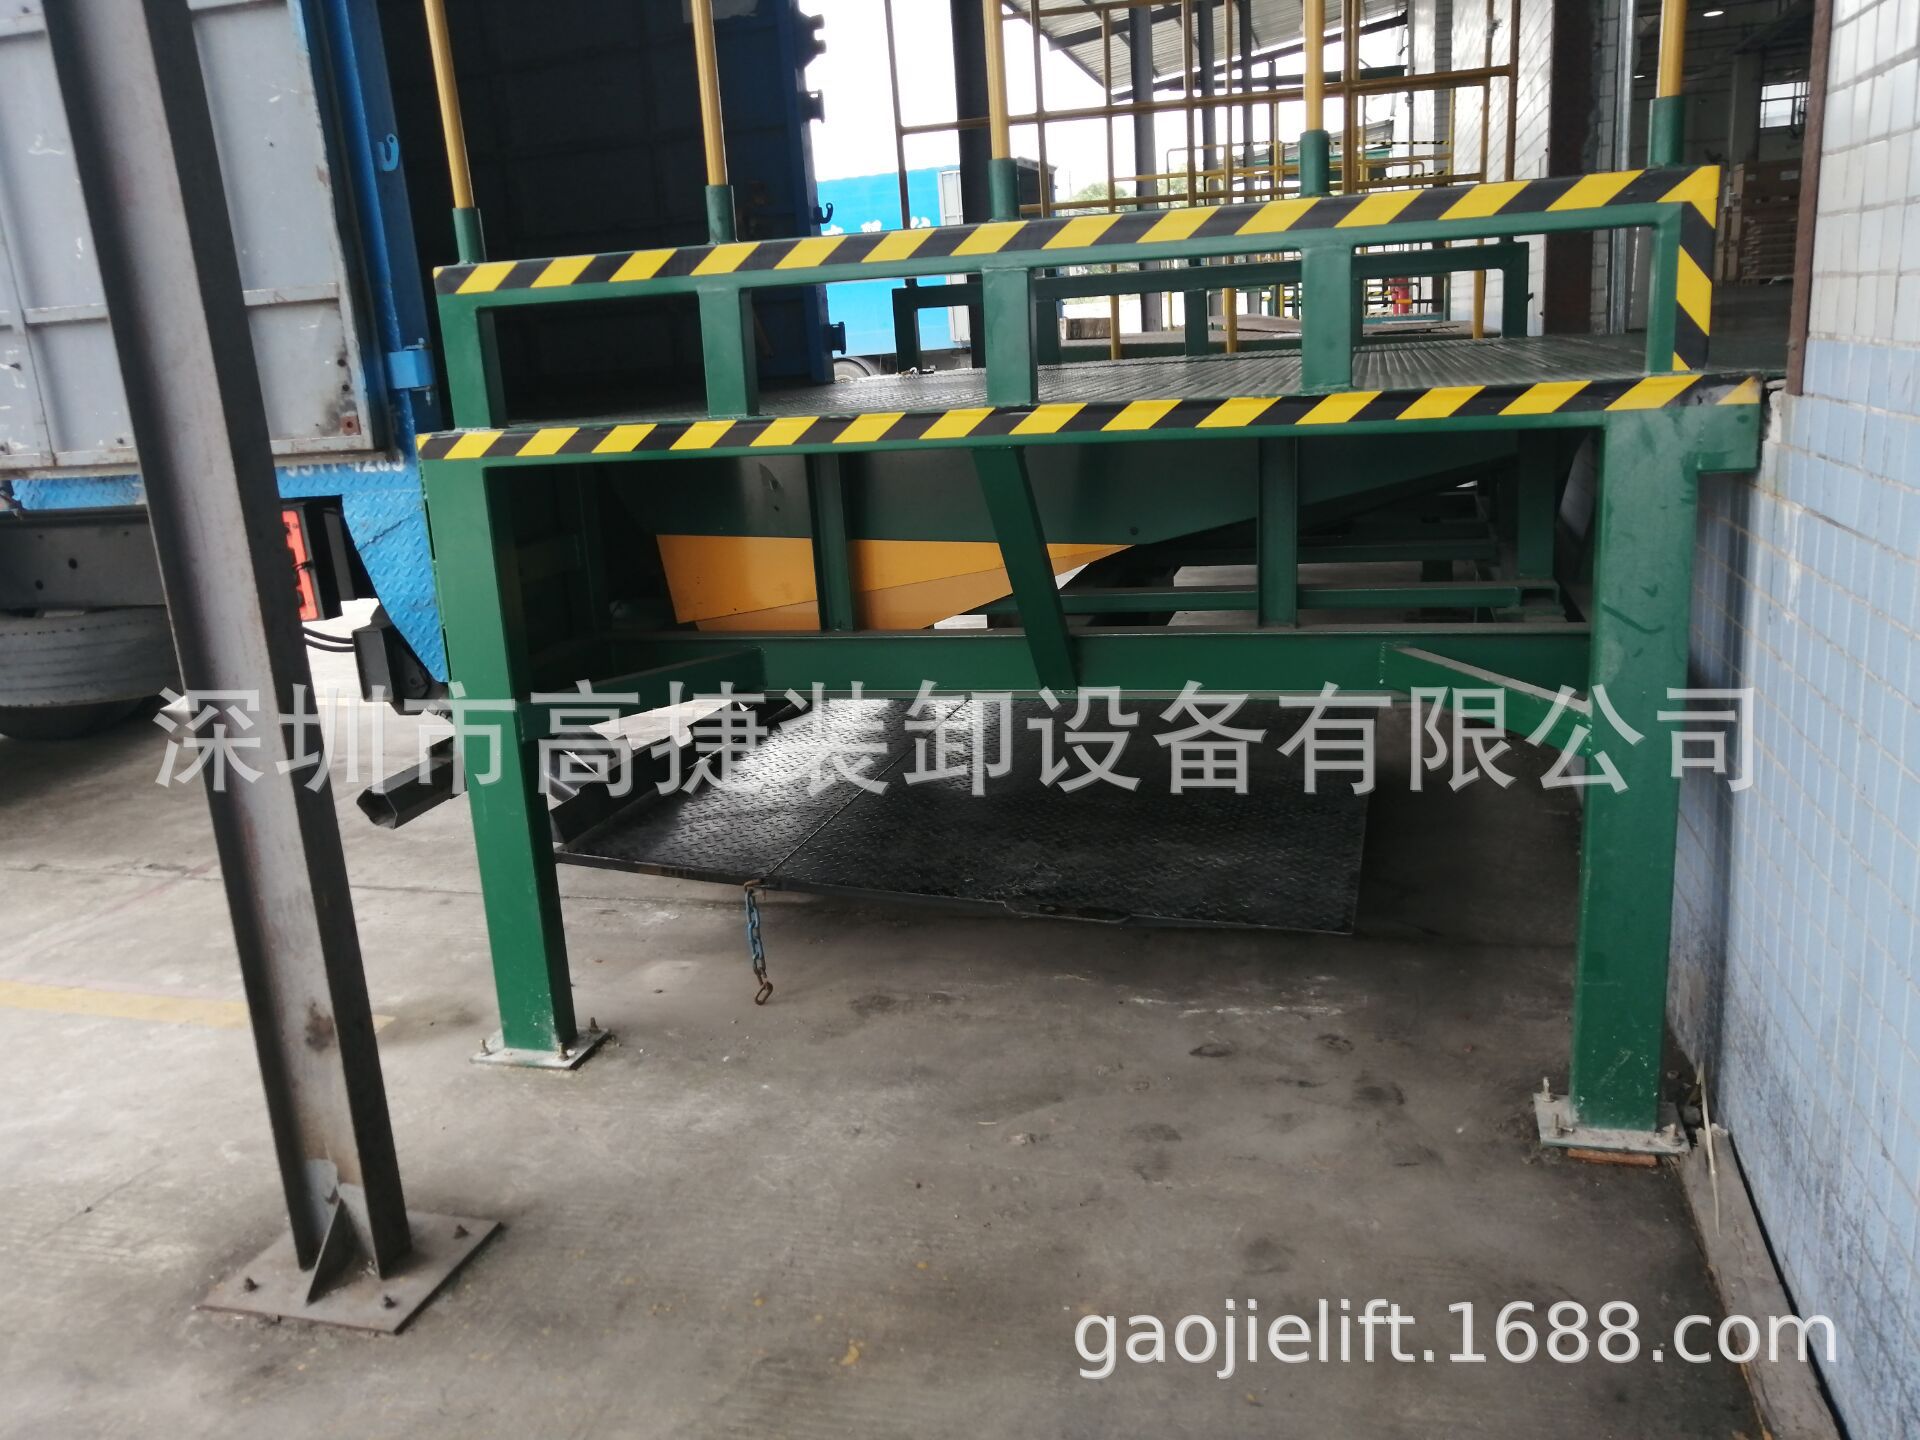 supply Against tail truck Use Fixed Hydraulic pressure The boarding bridge Height Adjusting plate Discharge cargo platform